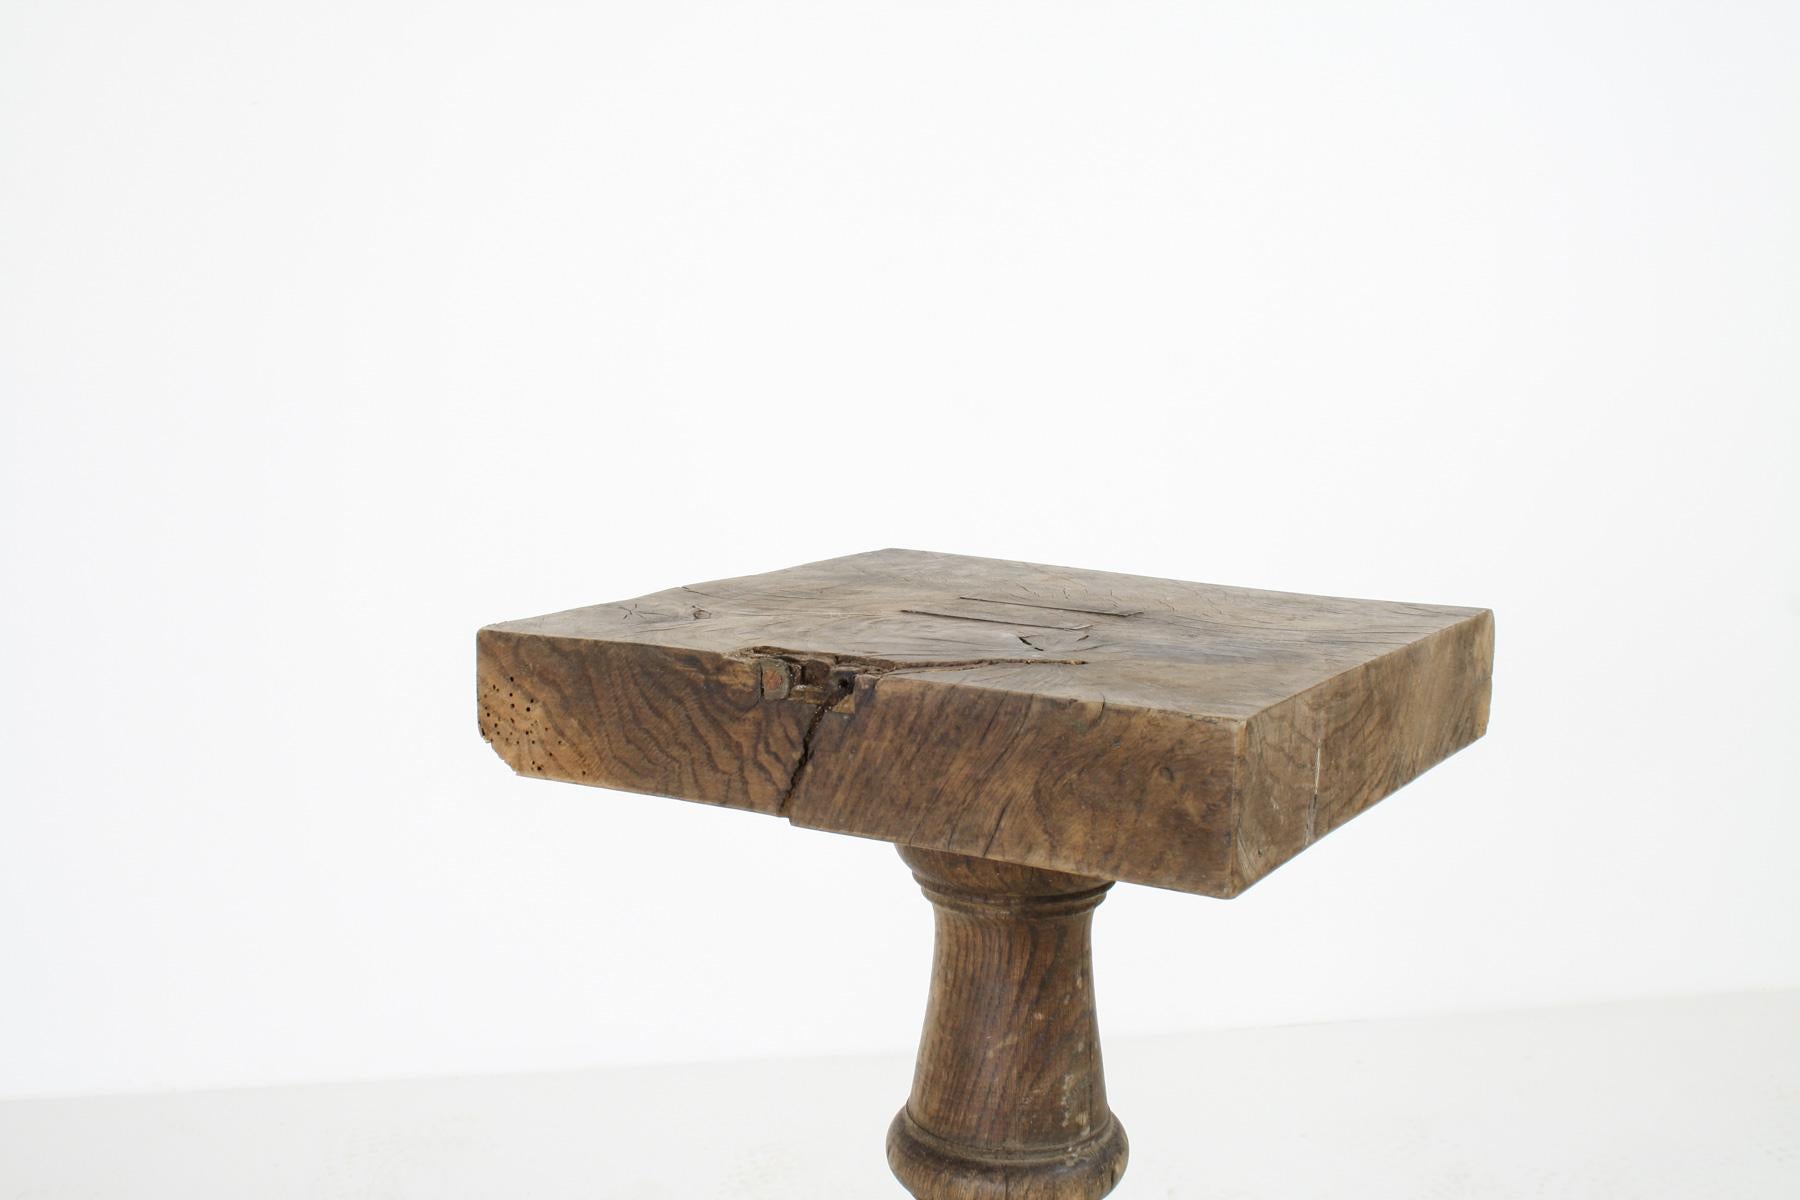 French Oak Plinth Pedastal Table, Decorative Plant Stand or Sculpture Display For Sale 2